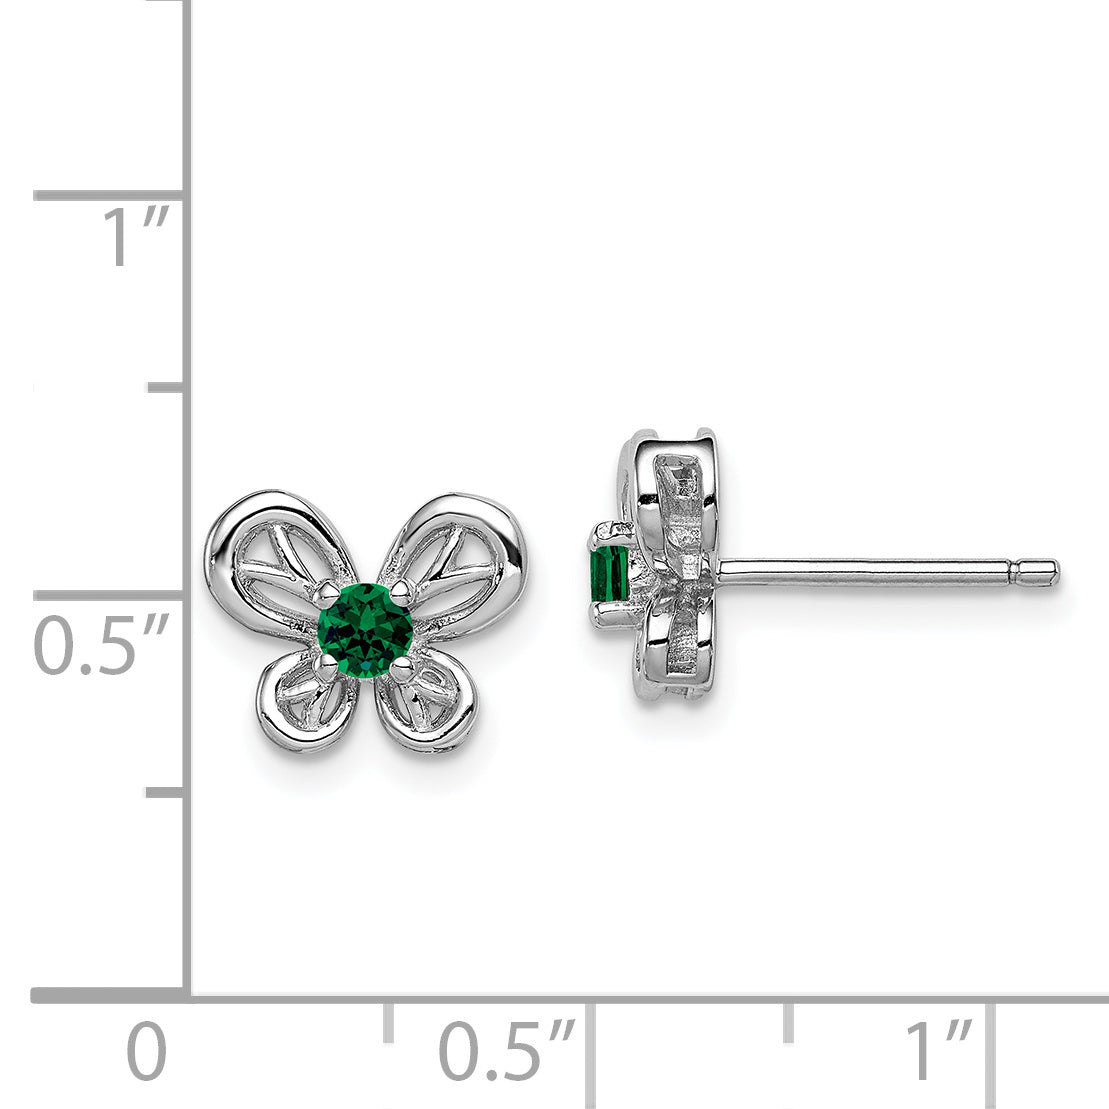 Sterling Silver Rhodium-plated Created Emerald Earrings